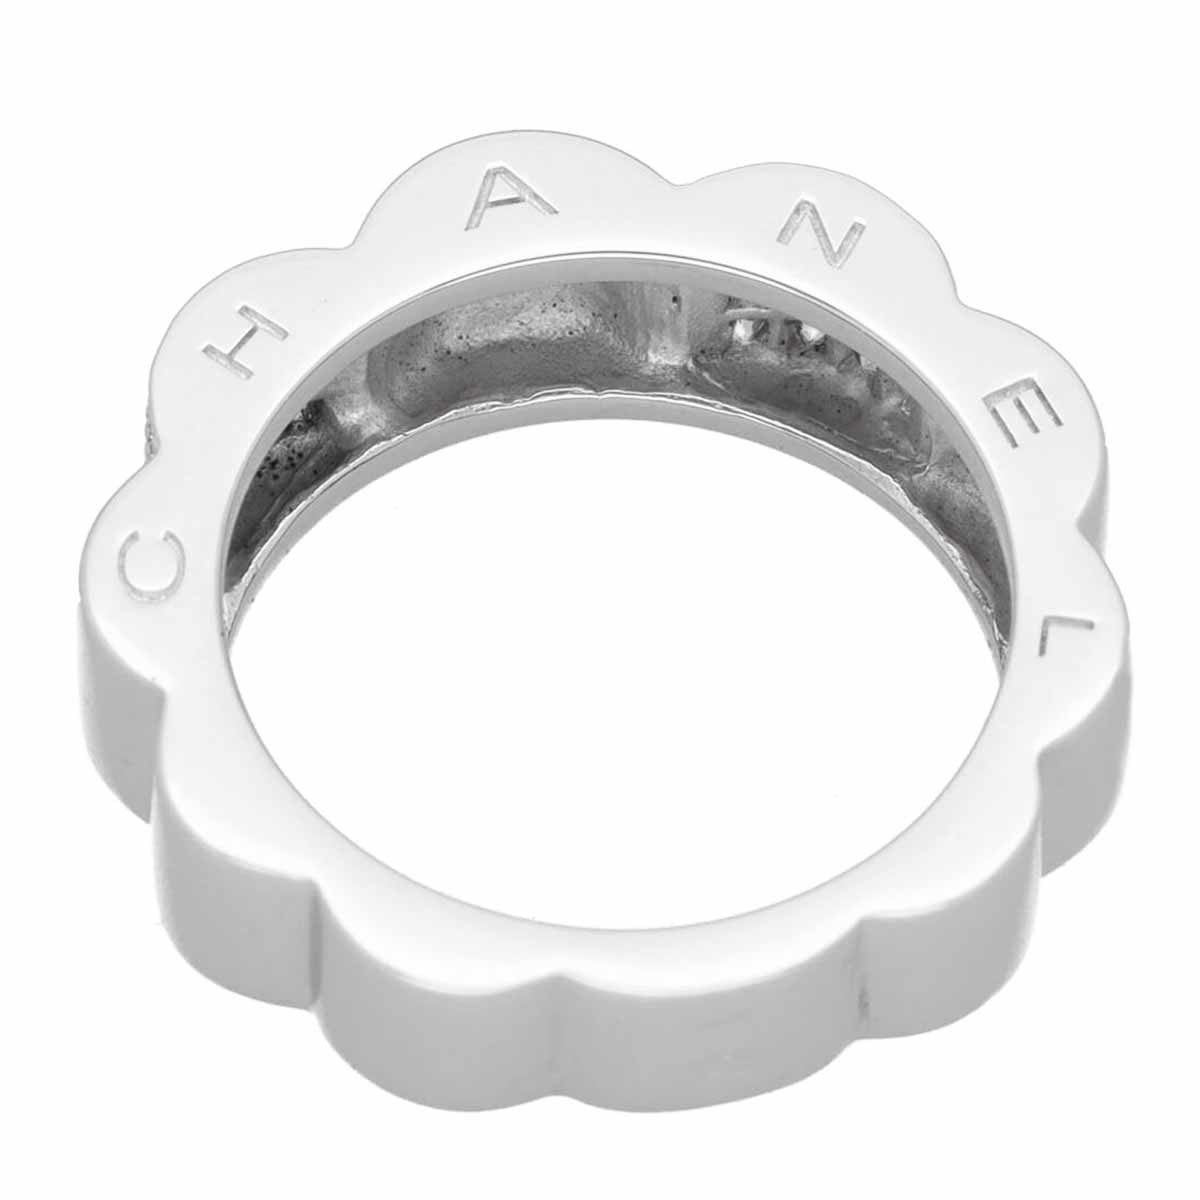 CHANEL Chanel diamond turtle rear ring 750 K18 WG white gold Japan size approximately 10 number #50